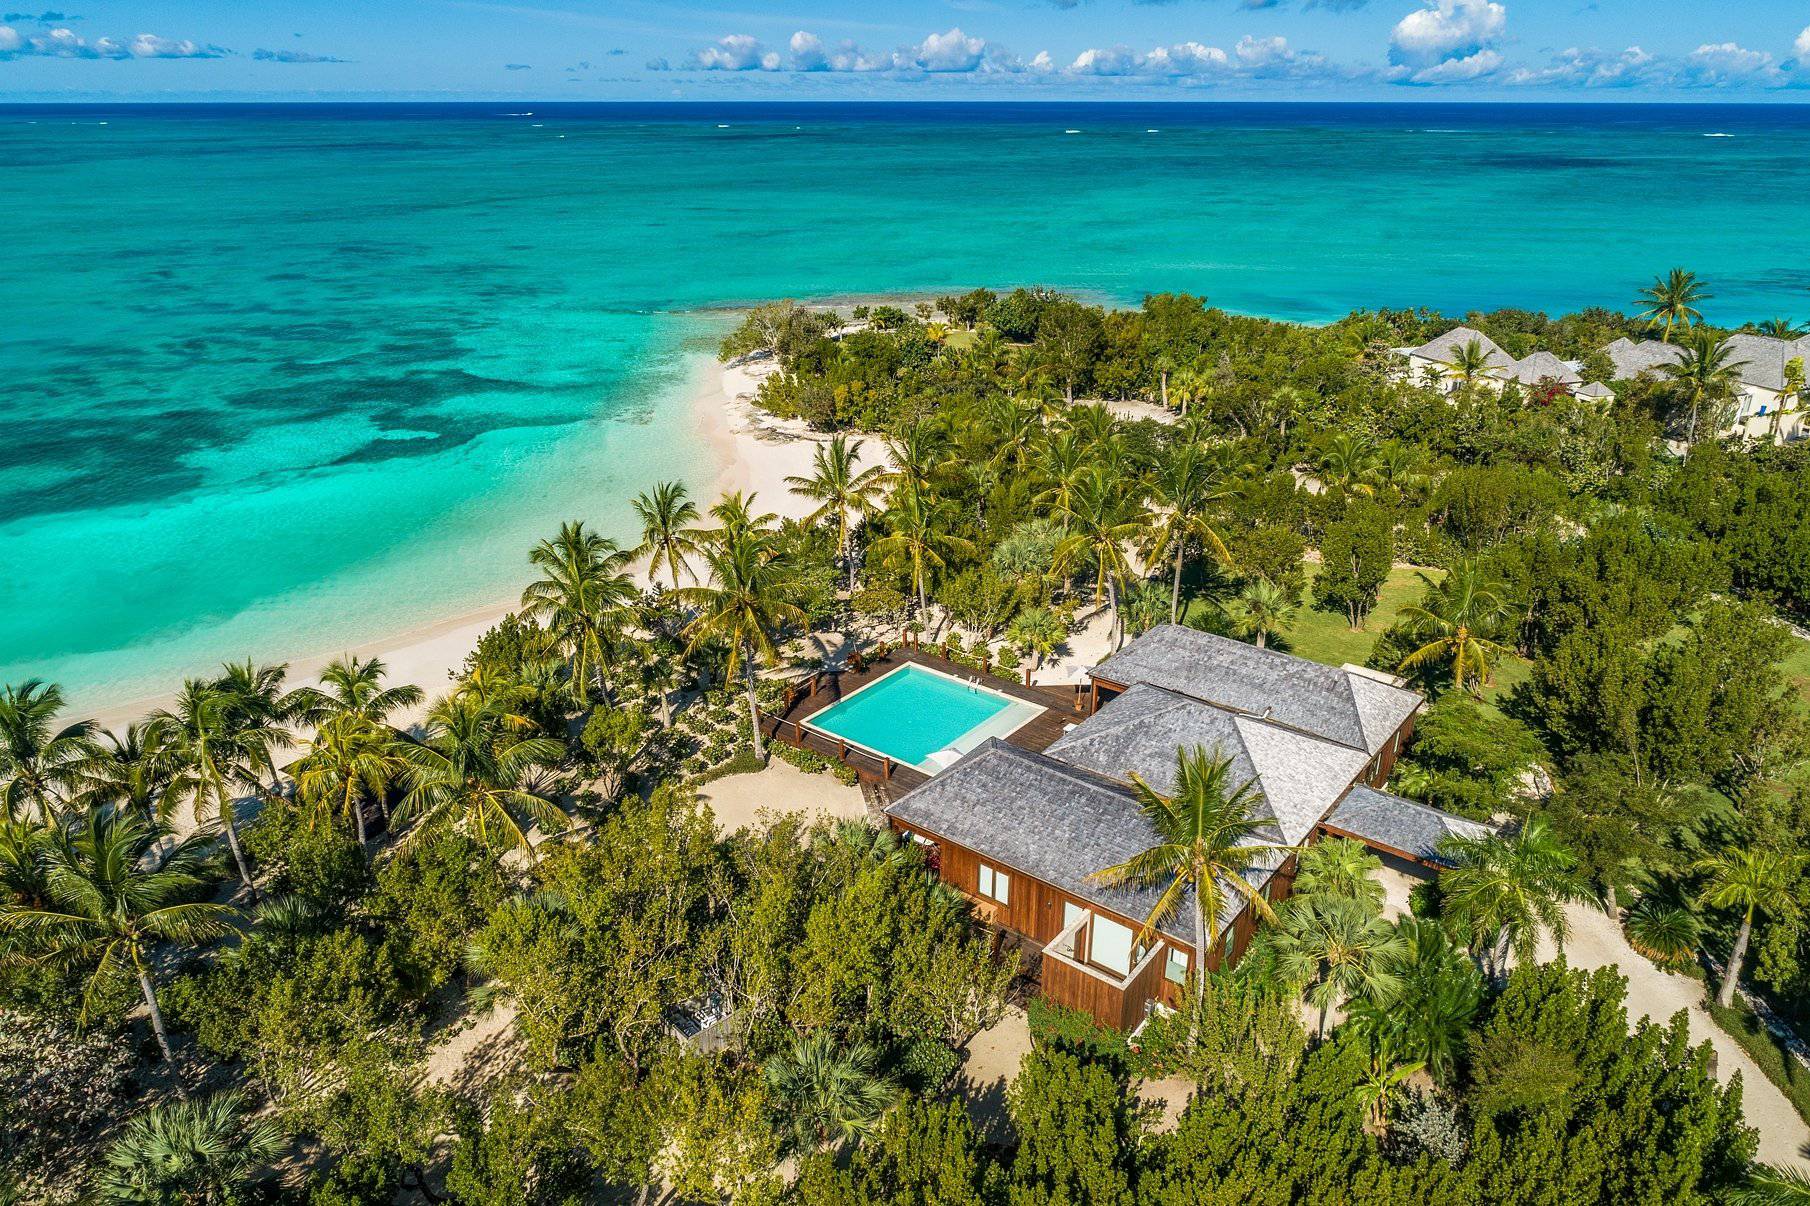 Nice place to Die Hard - Bruce Willis' stunning Caribbean home is now up for sale for $33million.